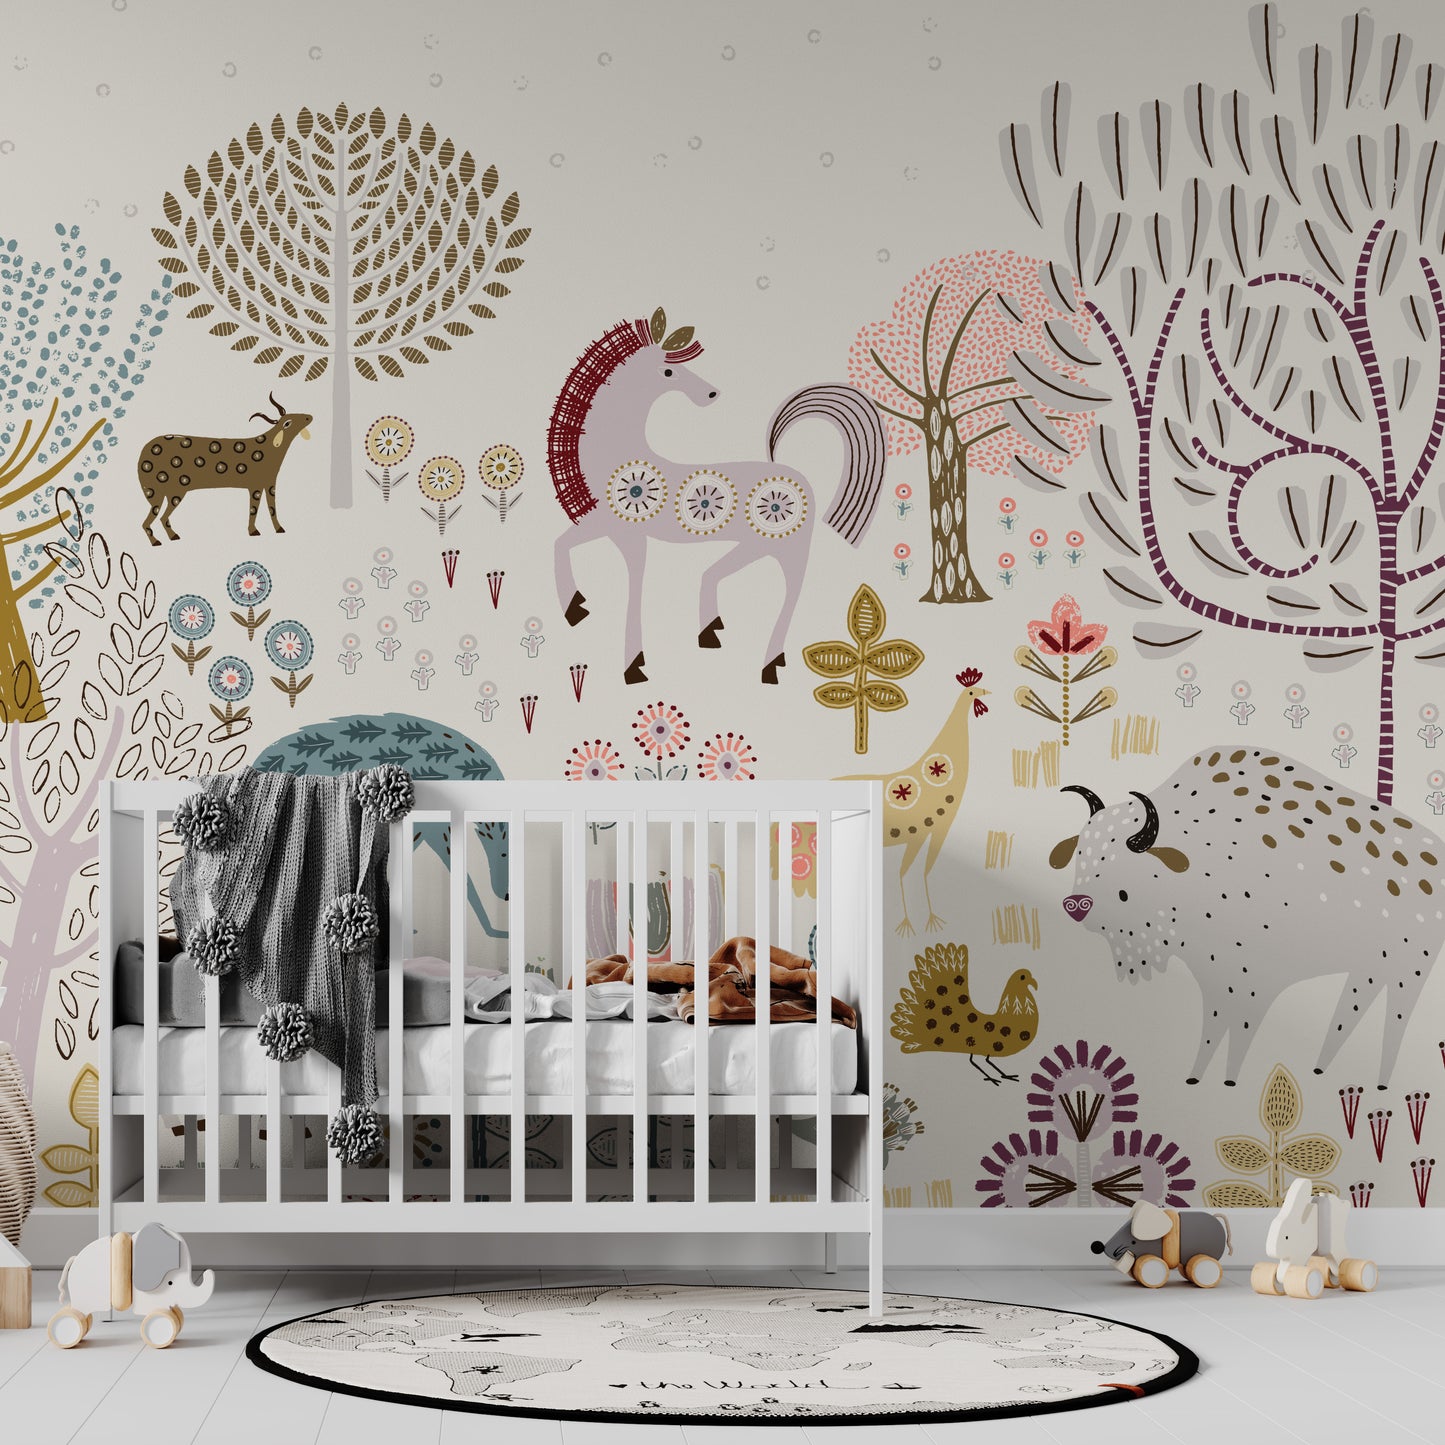 Load image into Gallery viewer, Woodland Folk Wallpaper Mural - Munks and Me Wallpaper
